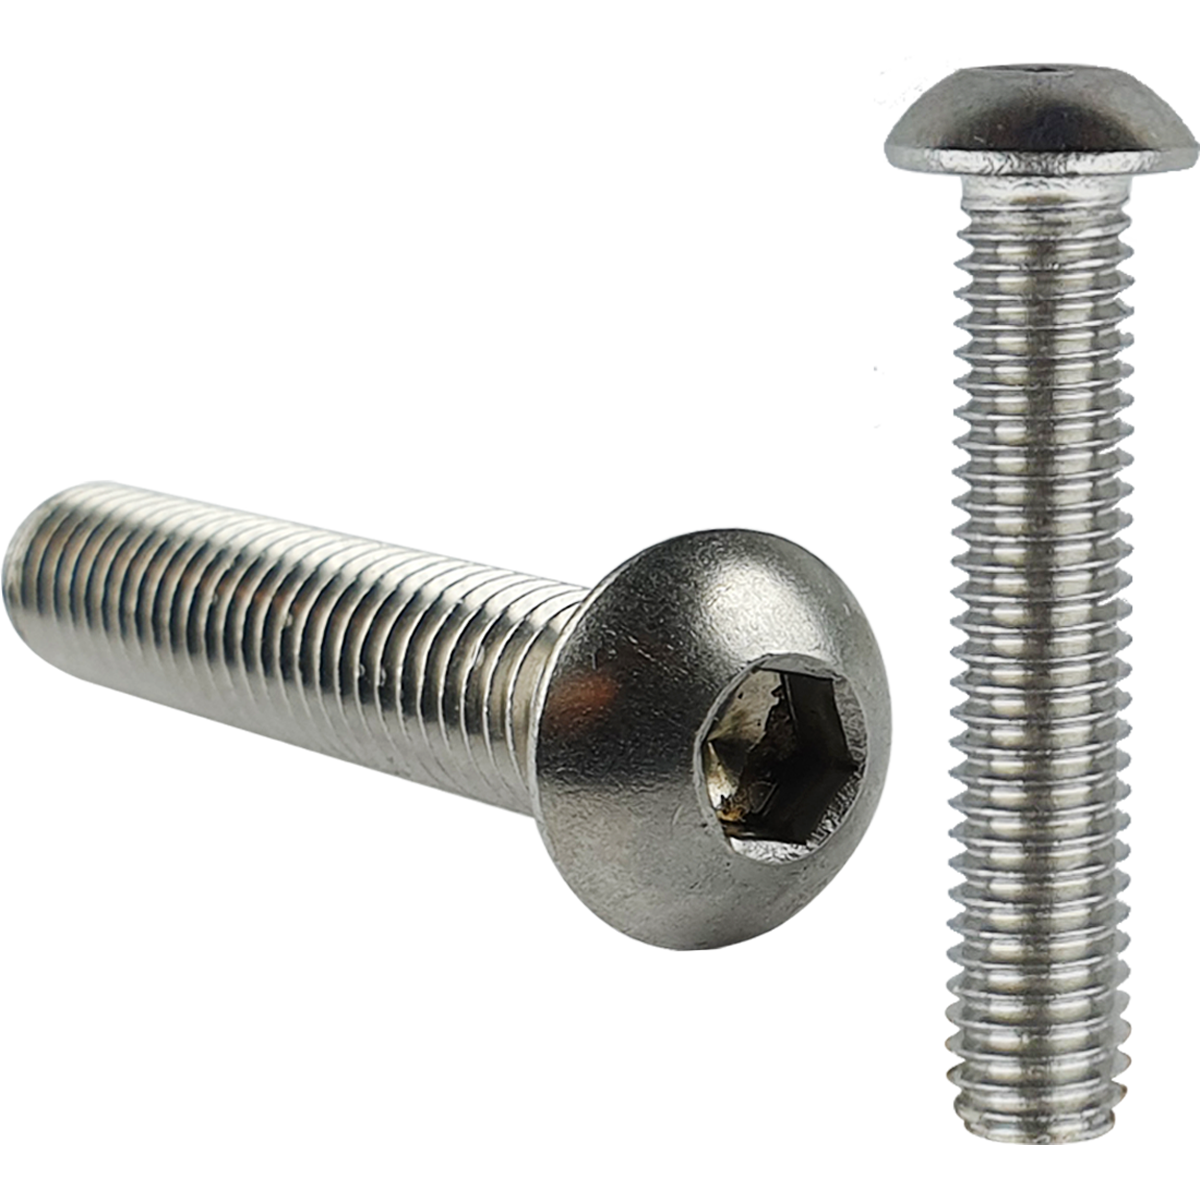 Competitive prices and extensive range on these A2 stainless steel socket button head screws with a unified coarse thread (UNC). A machine screw with a button head for a snag free finsih.